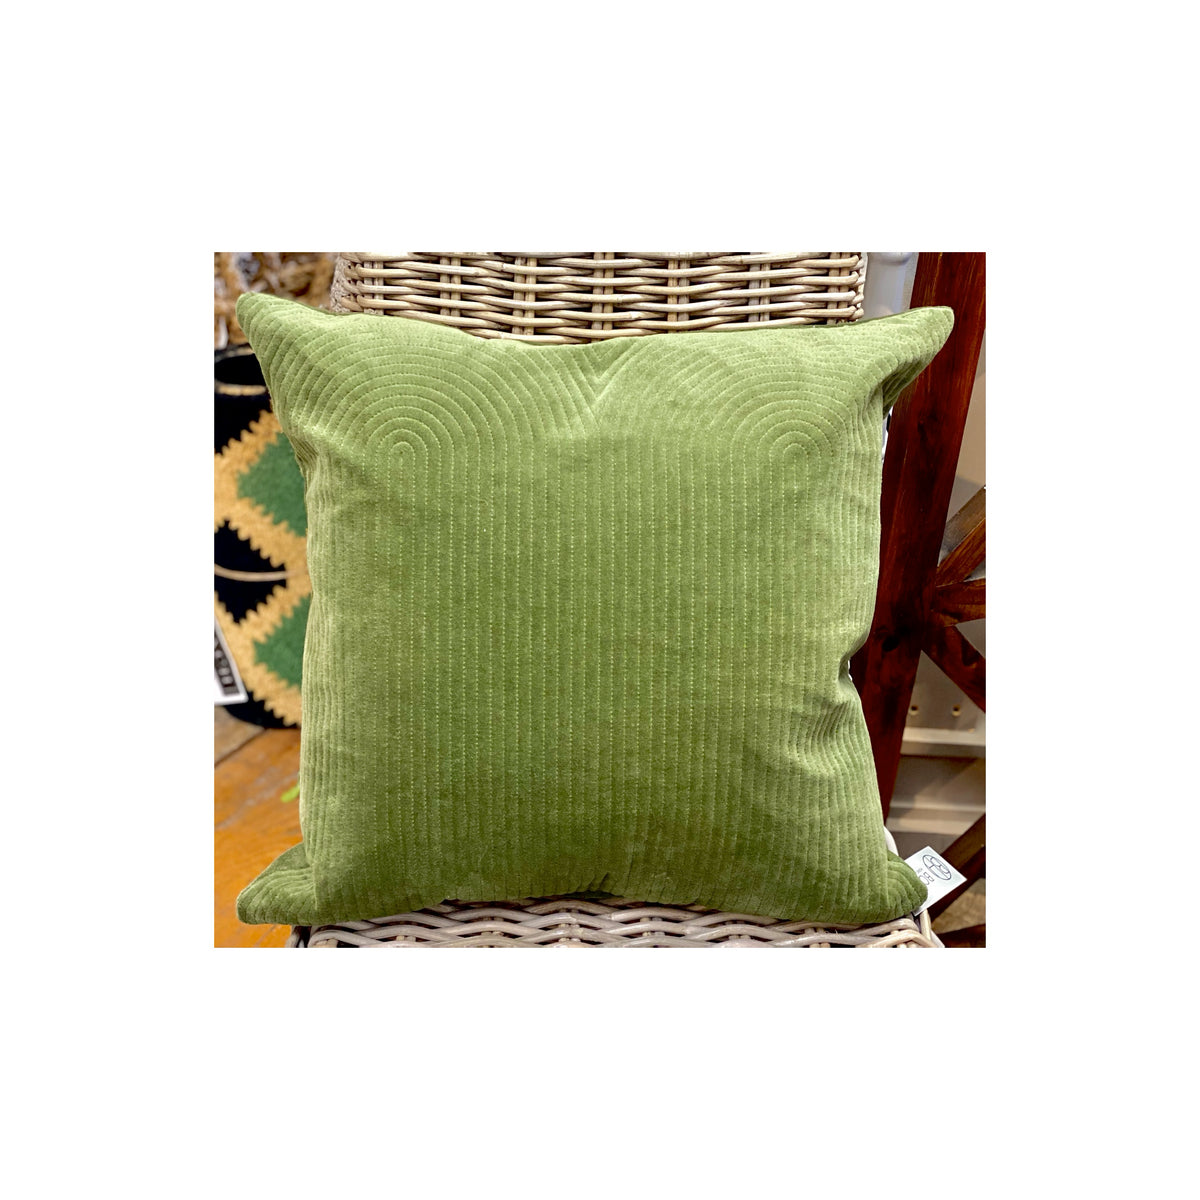 Green Cushion With Stitching